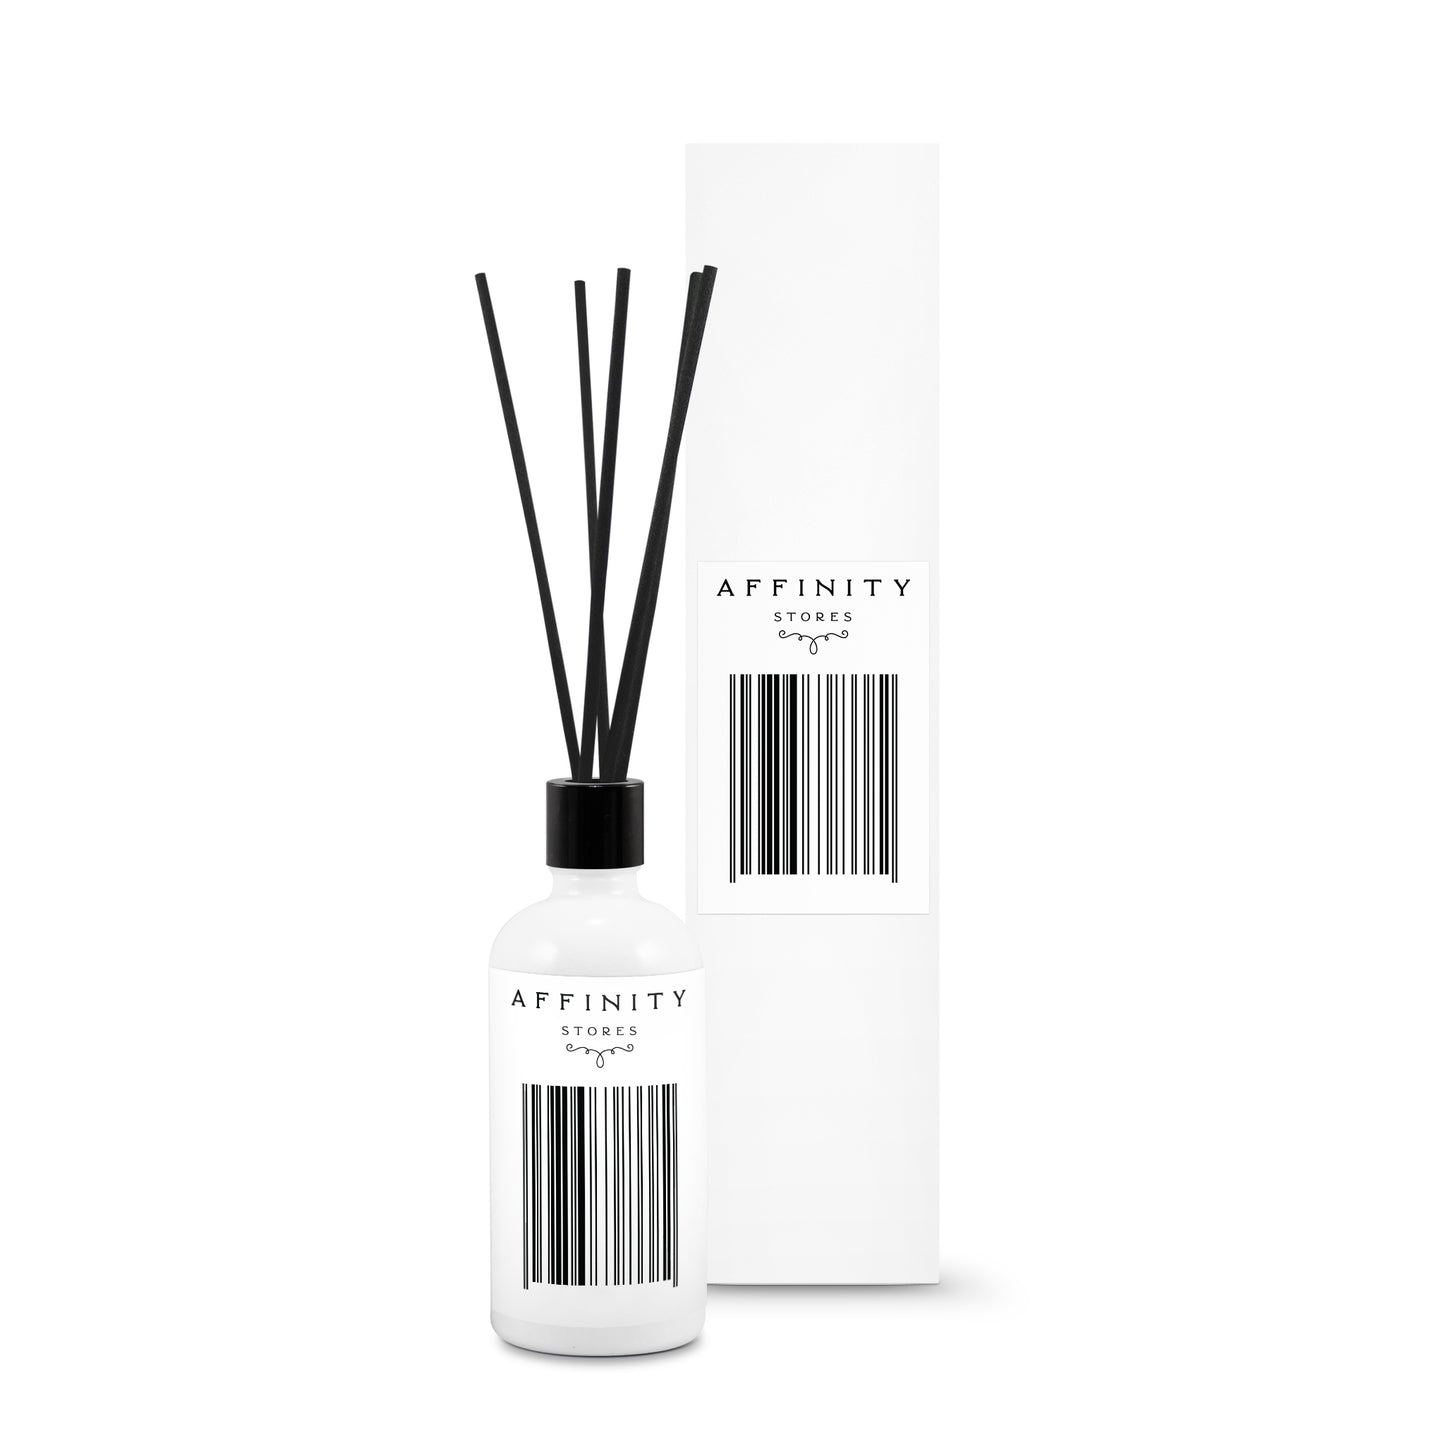 Harmony -  Reed Diffuser | Inspired by Fairmont Hotel and Le Labo Rose 31®